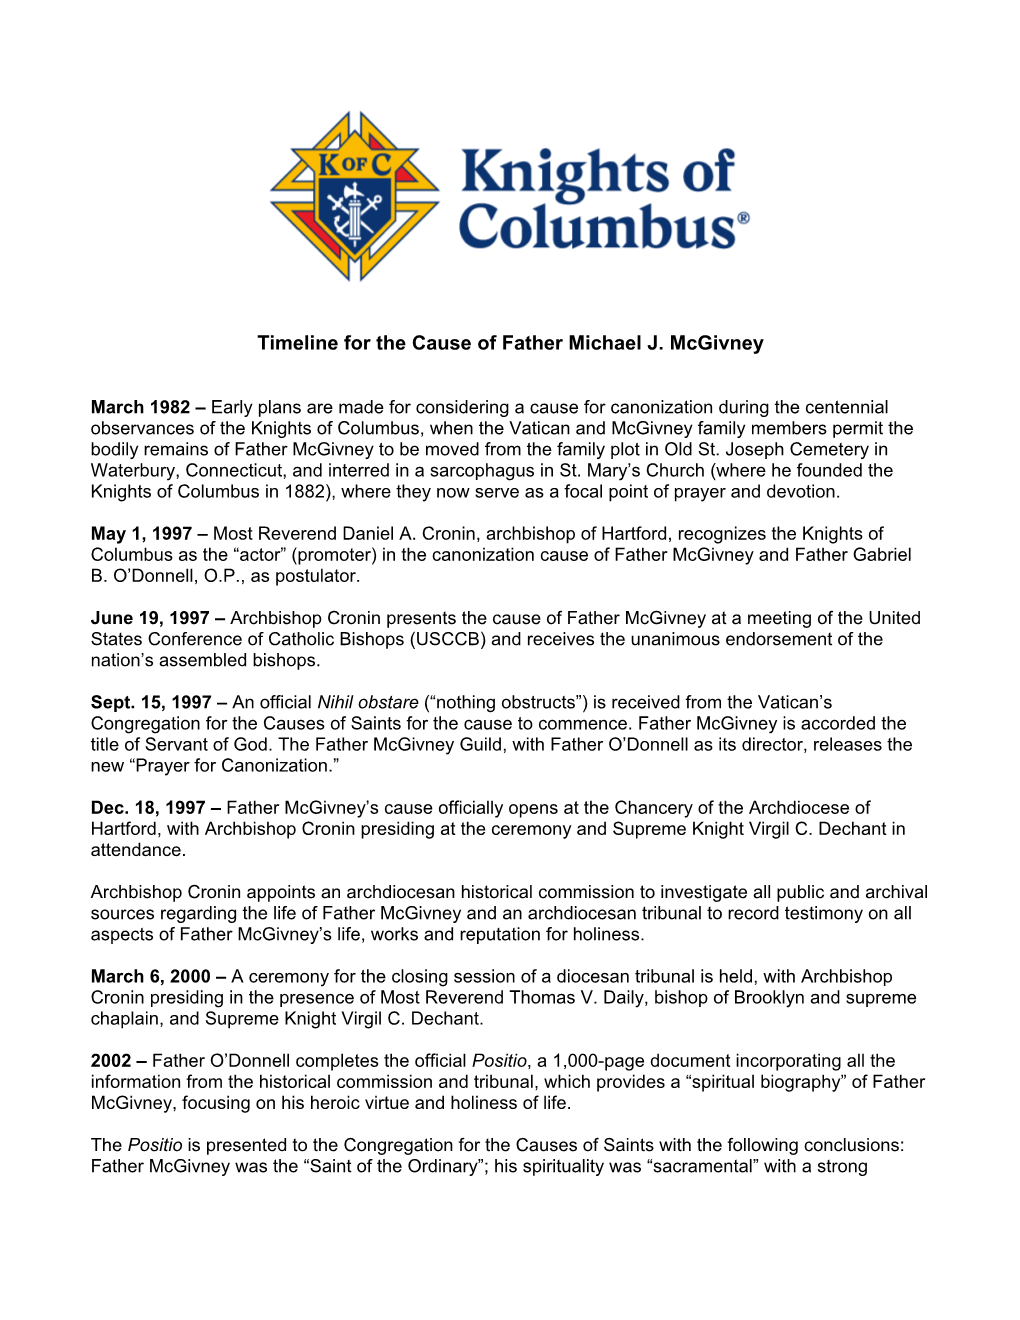 Timeline for the Cause of Father Michael J. Mcgivney